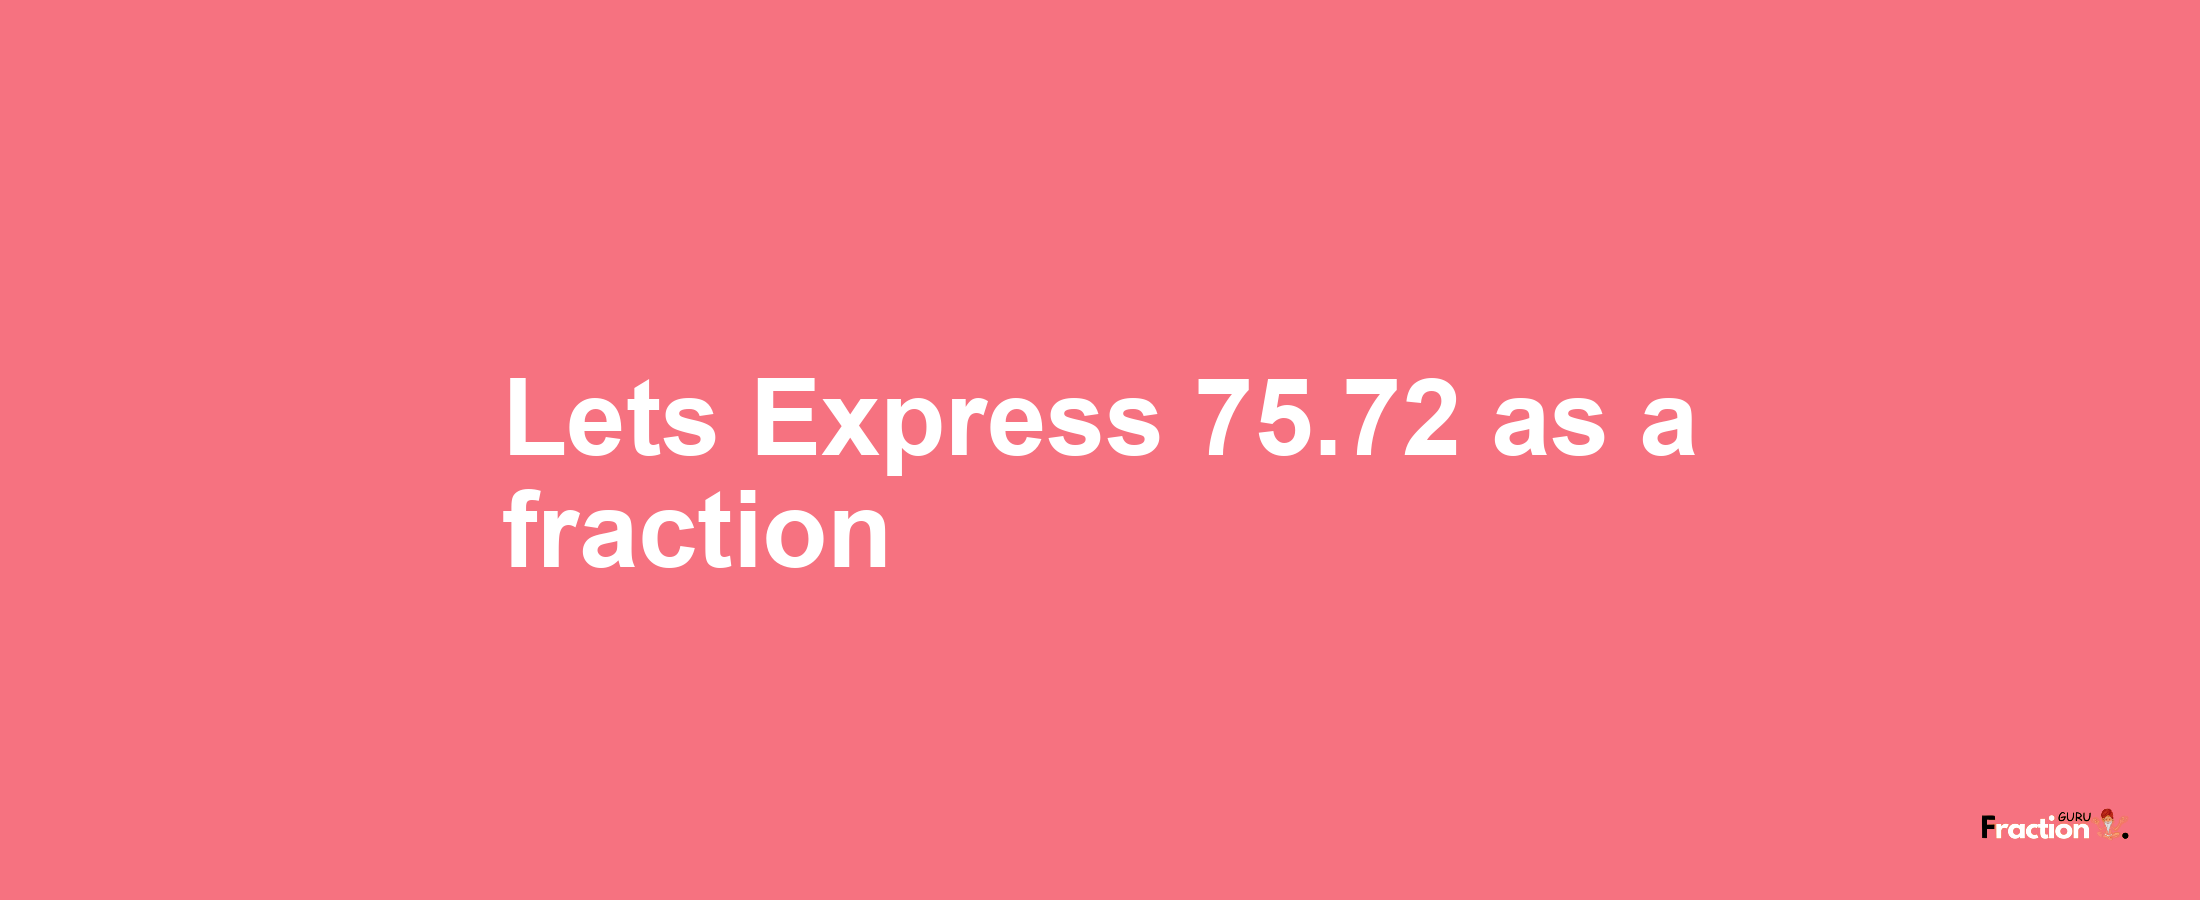 Lets Express 75.72 as afraction